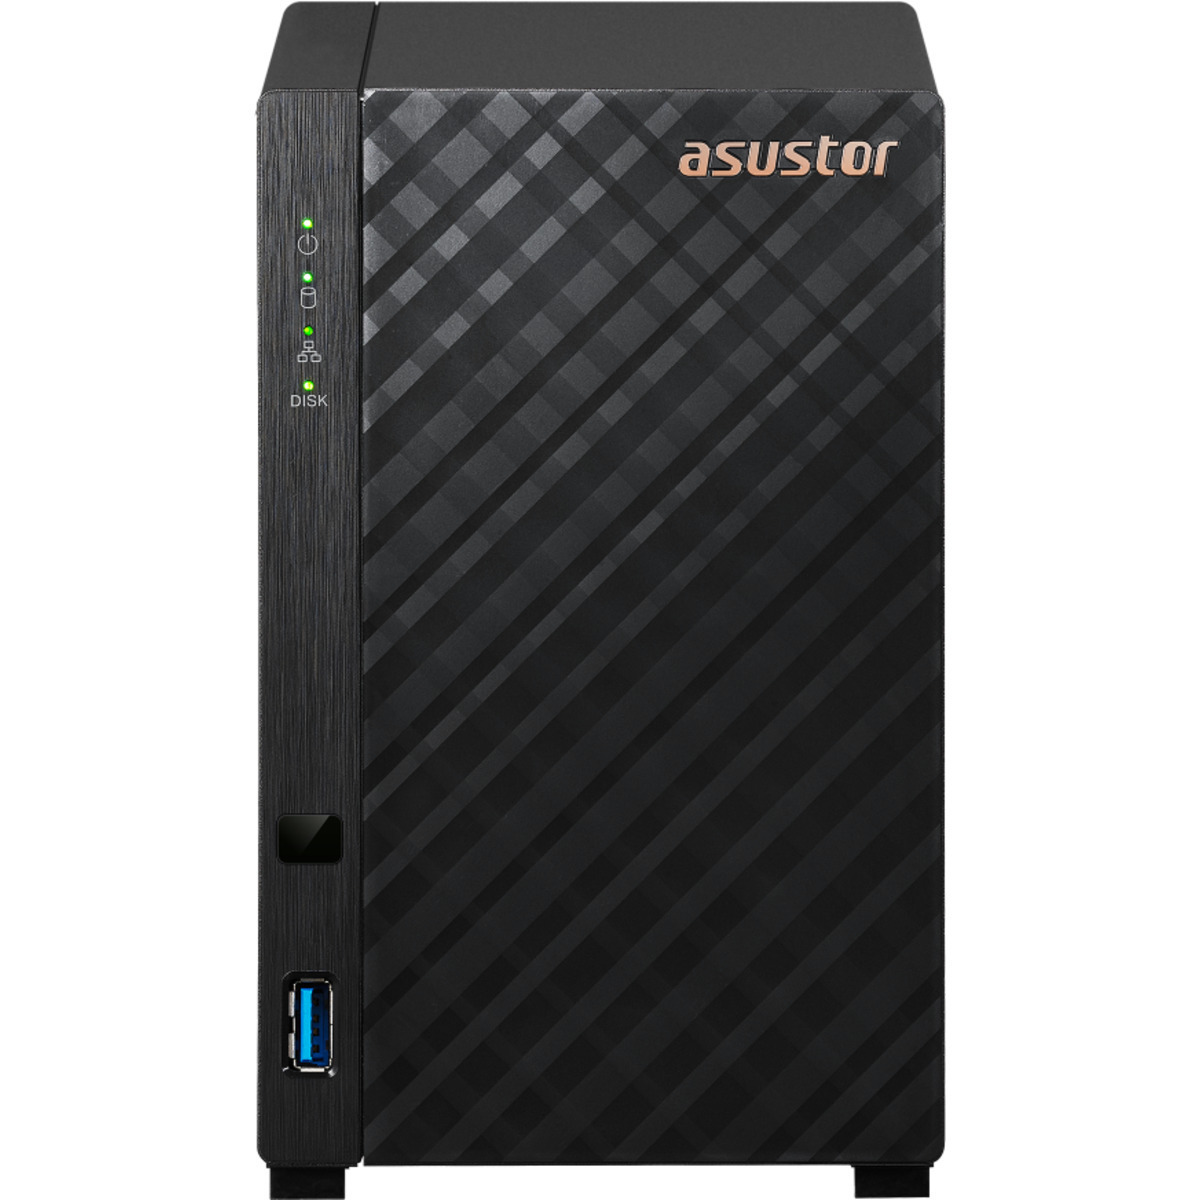 buy $1753 ASUSTOR DRIVESTOR 2 AS1102T 8tb Desktop NAS - Network Attached Storage Device 2x4000gb Seagate IronWolf 125 ZA4000NM10002 2.5 560/540MB/s SATA 6Gb/s SSD NAS Class Drives Installed - Burn-In Tested - nas headquarters buy network attached storage server device das new raid-5 free shipping usa DRIVESTOR 2 AS1102T